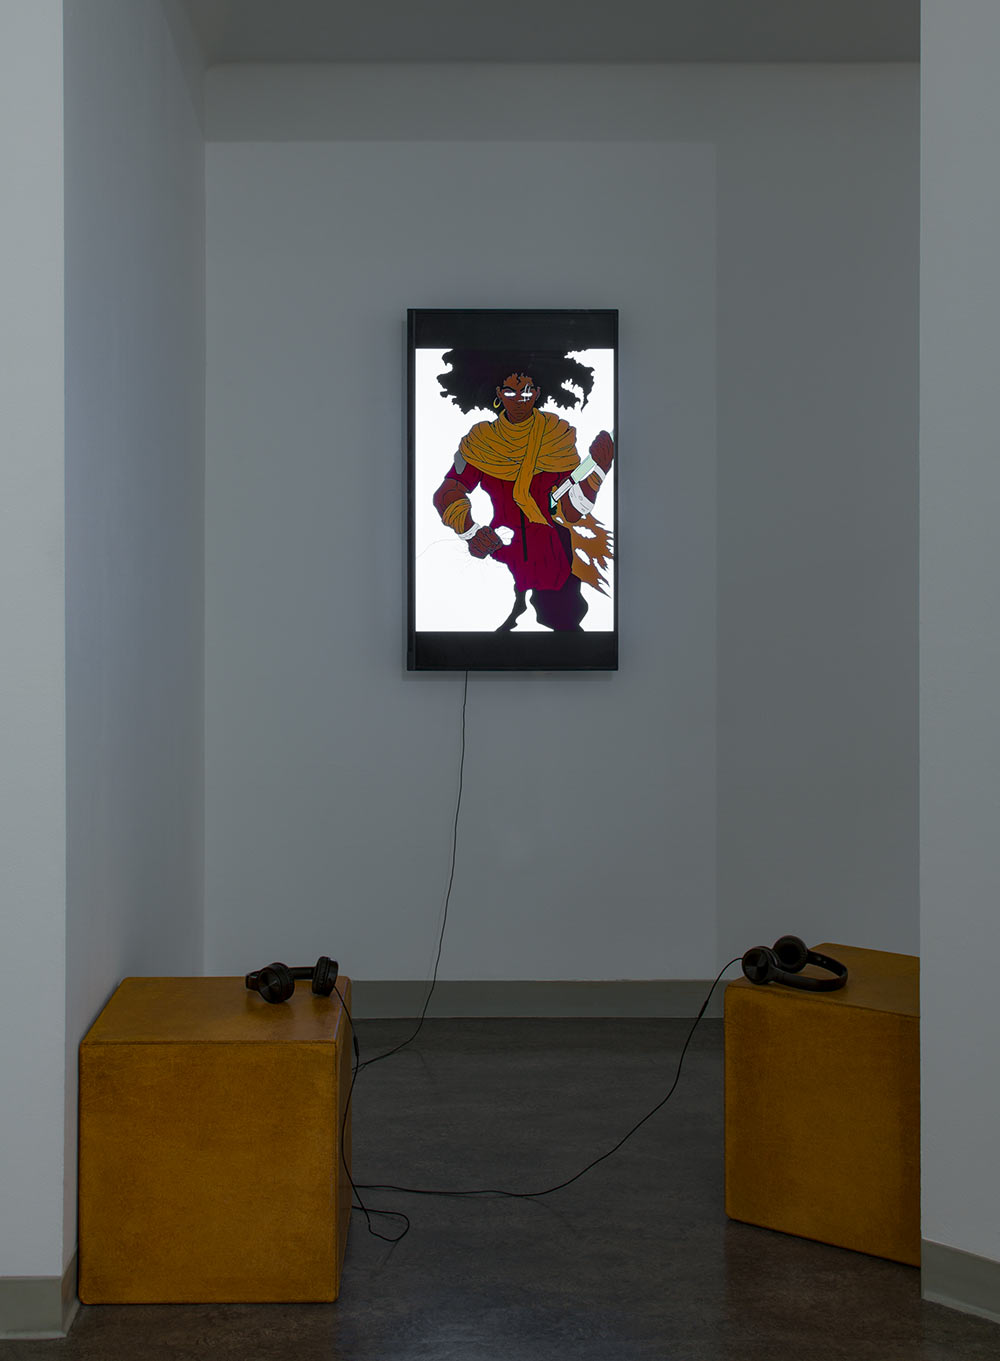 Photograph of a video piece by Torren Broussard-Boston installed in the Vachon Gallery